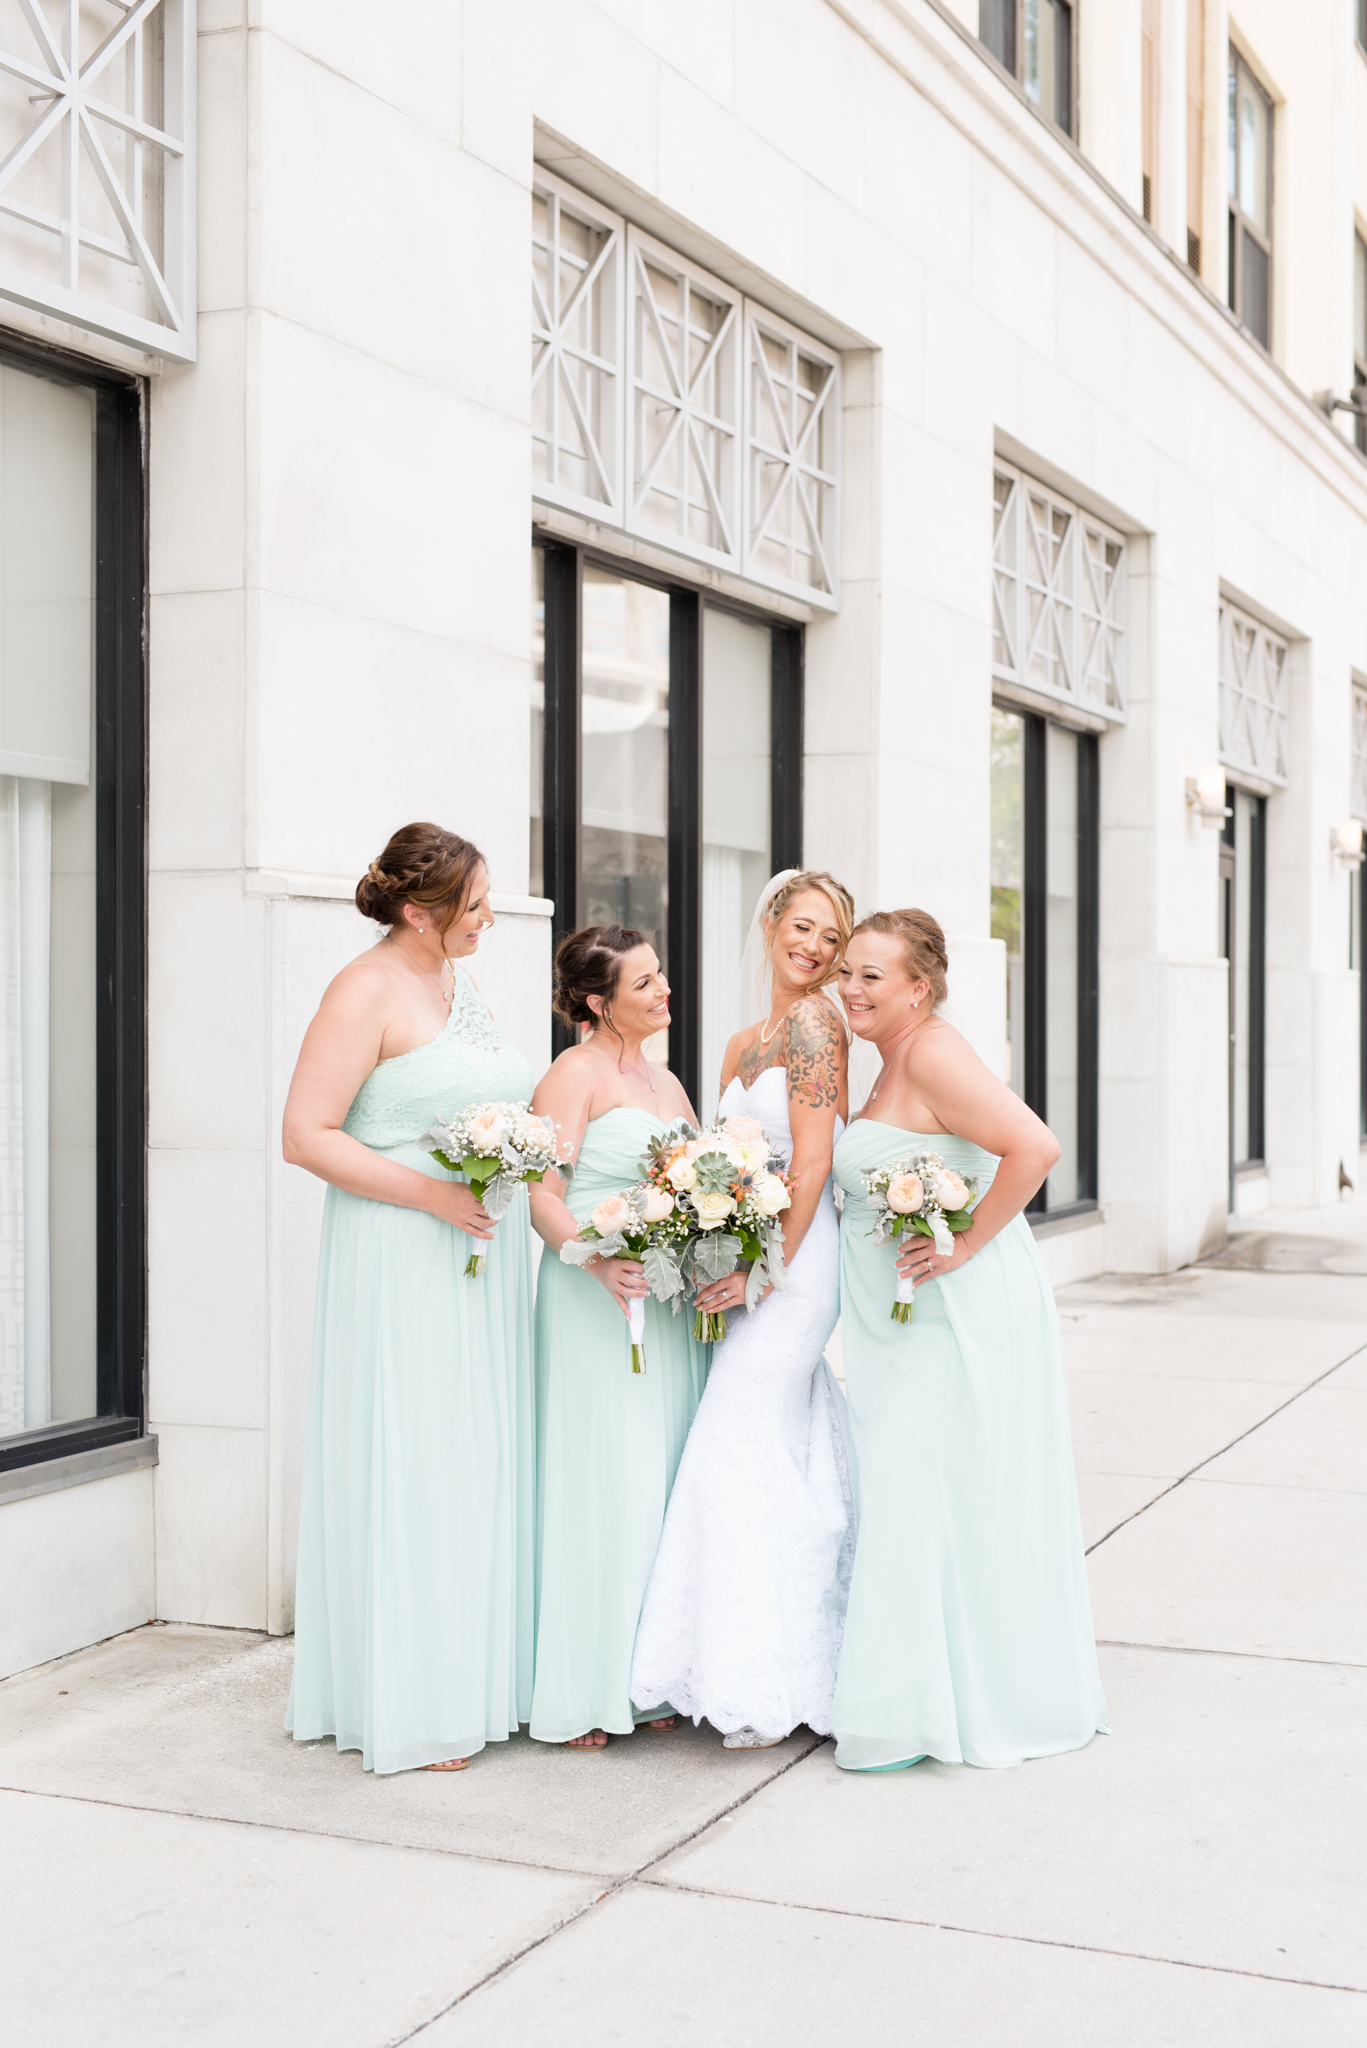 Bridal party smiles together on St.Petersburg street.